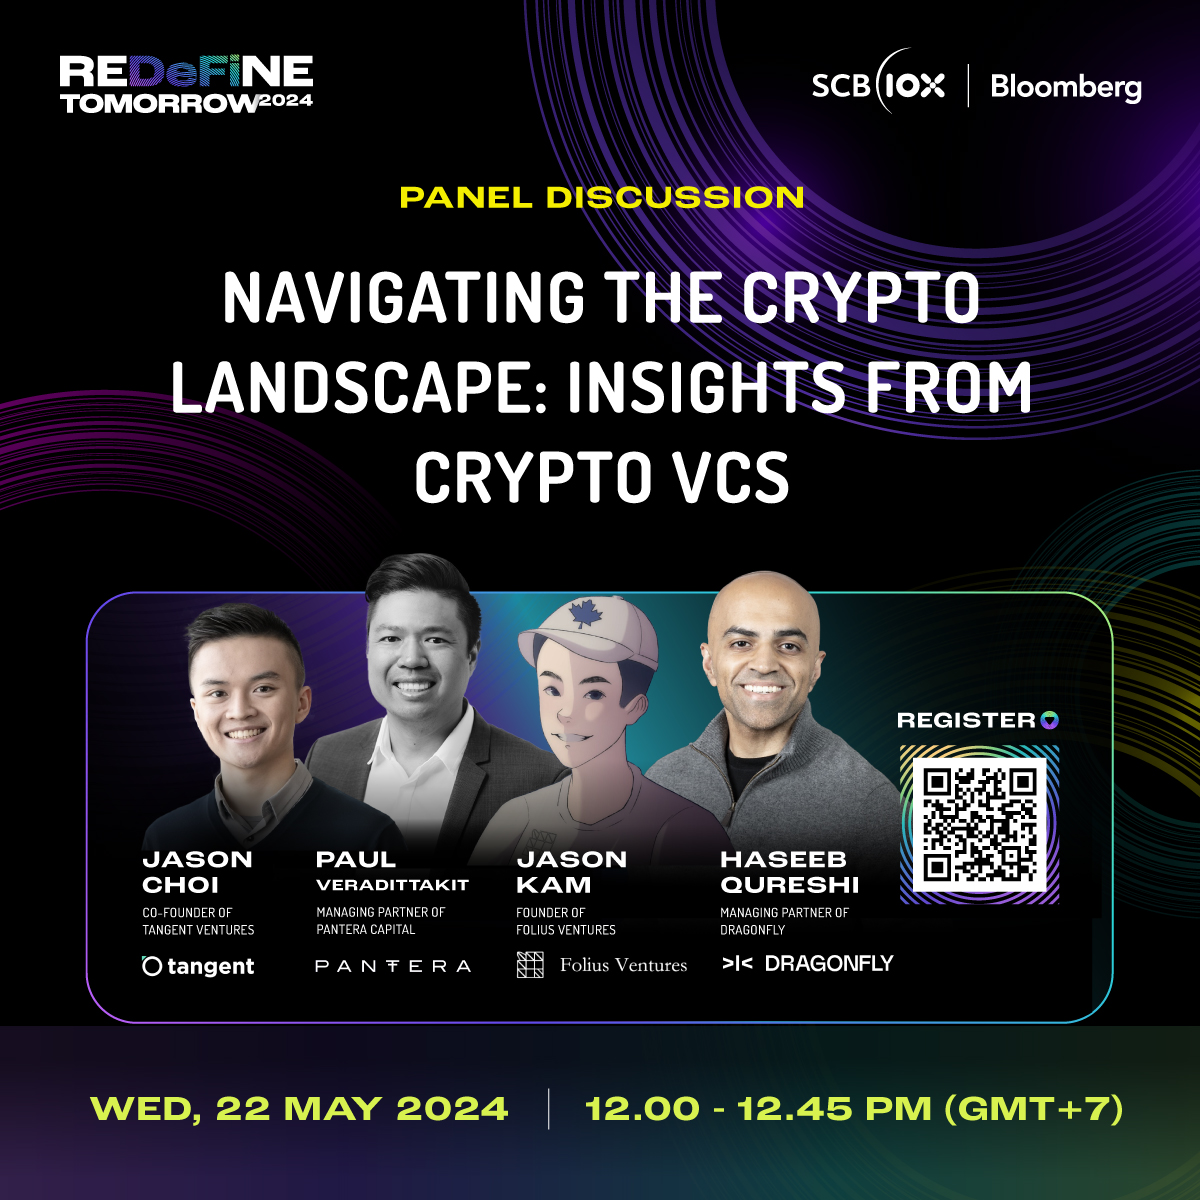 Meet the speakers at #REDeFiNETOMORROW2024 / 21-22 May 2024 Panel Discussion: Navigating the Crypto Landscape: Insights from Crypto VCs @mrjasonchoi of @tangent_xyz @veradittakit of @PanteraCapital @MapleLeafCap of @FoliusVentures @hosseeb of @dragonfly_xyz Free ticket: